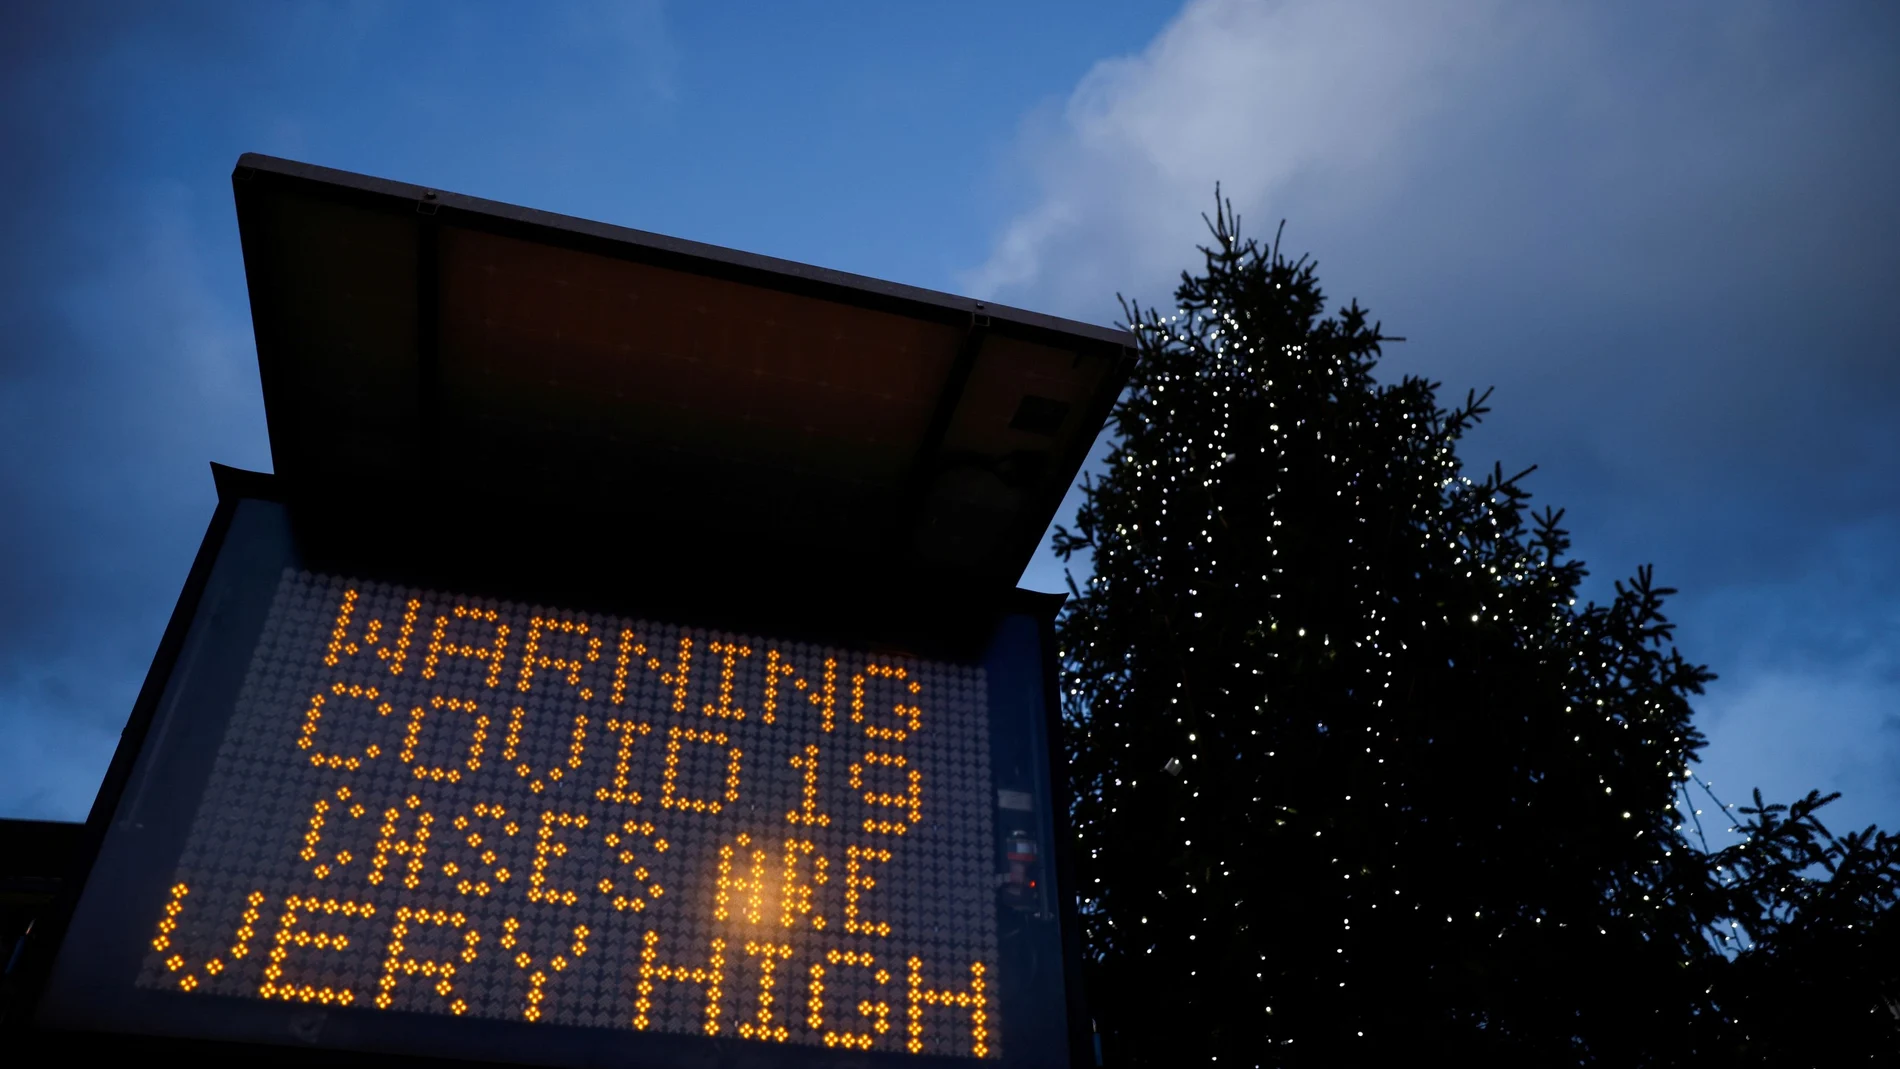 FILE PHOTO: An electronic sign displays information as the British government imposes a stricter tiered set of restrictions amid the coronavirus disease (COVID-19) pandemic, in London, Britain, December 20, 2020. REUTERS/John Sibley/File Photo